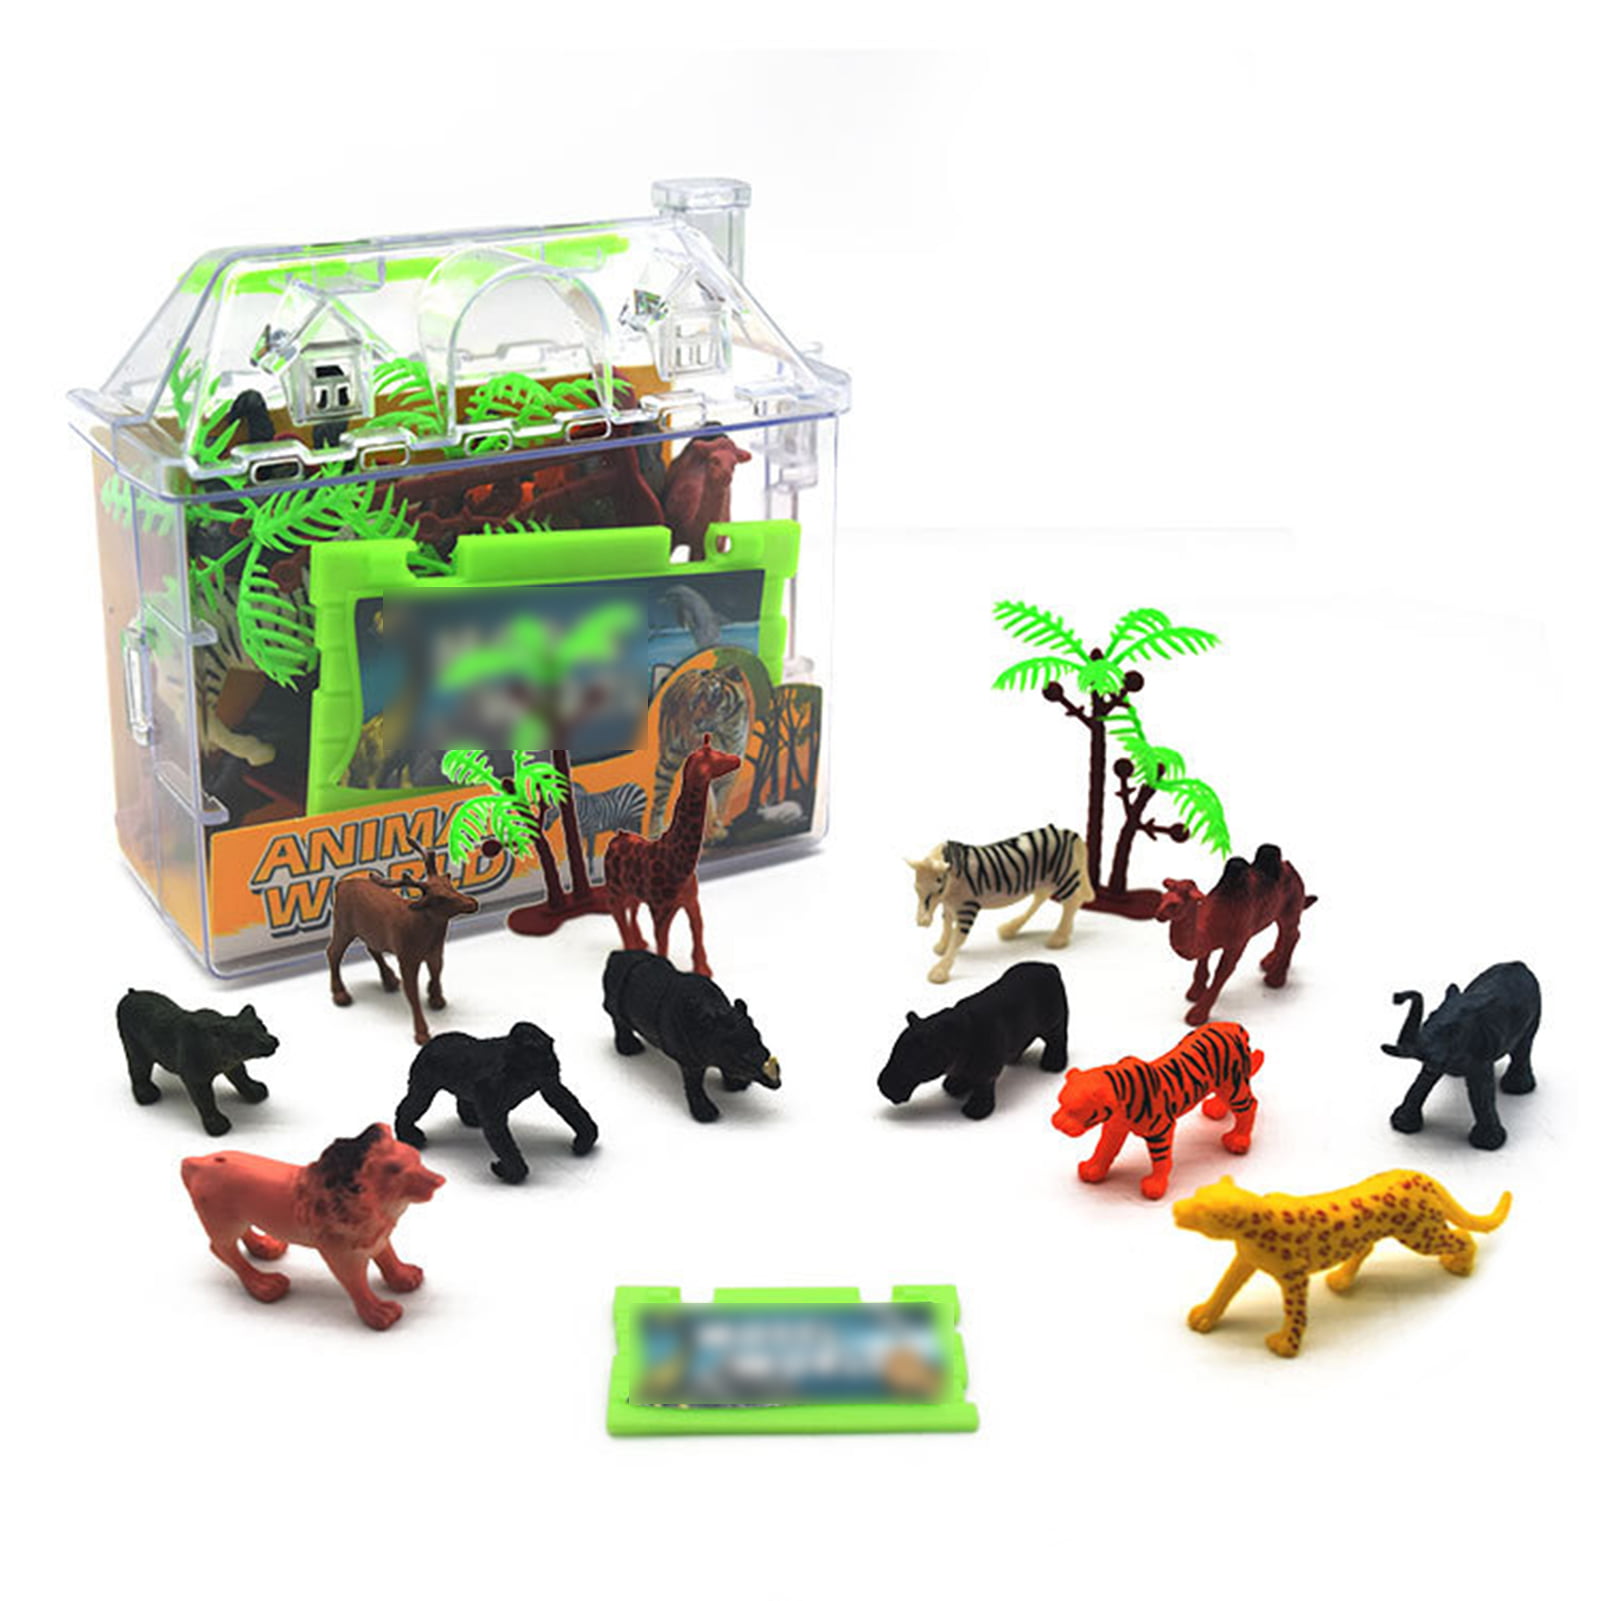 Lifelike Plastic Animal Figurine Mode Playset Toy Model for Kids Collectibles 